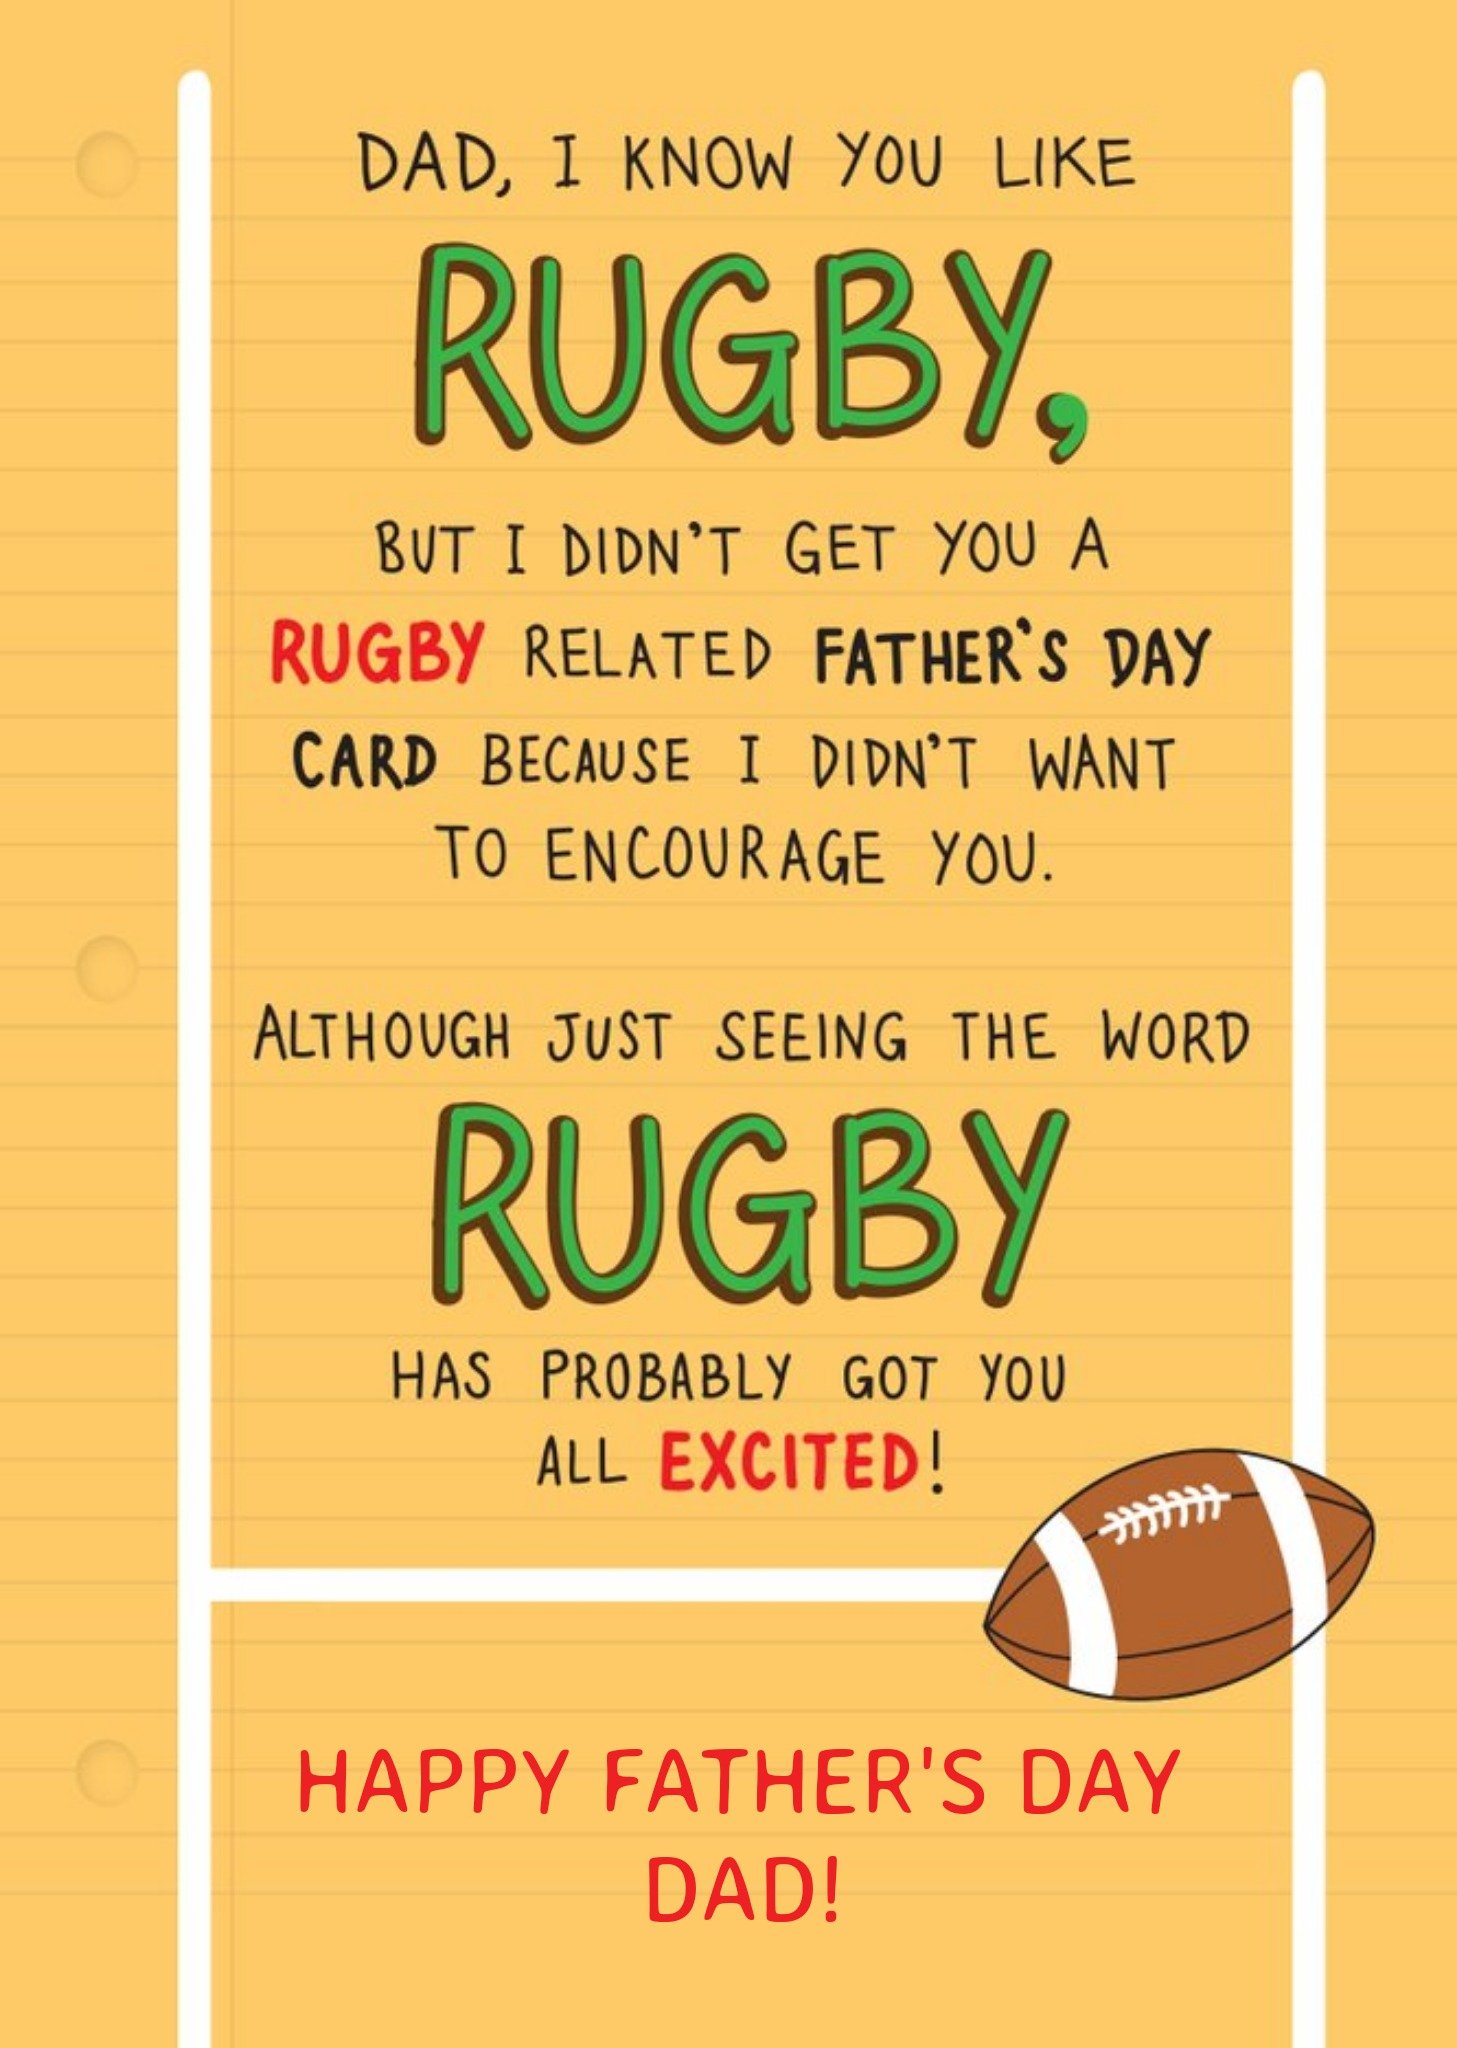 Moonpig Funny Humour Comedy Dad, I Know You Like Rugby Personalised Father's Day Card Ecard